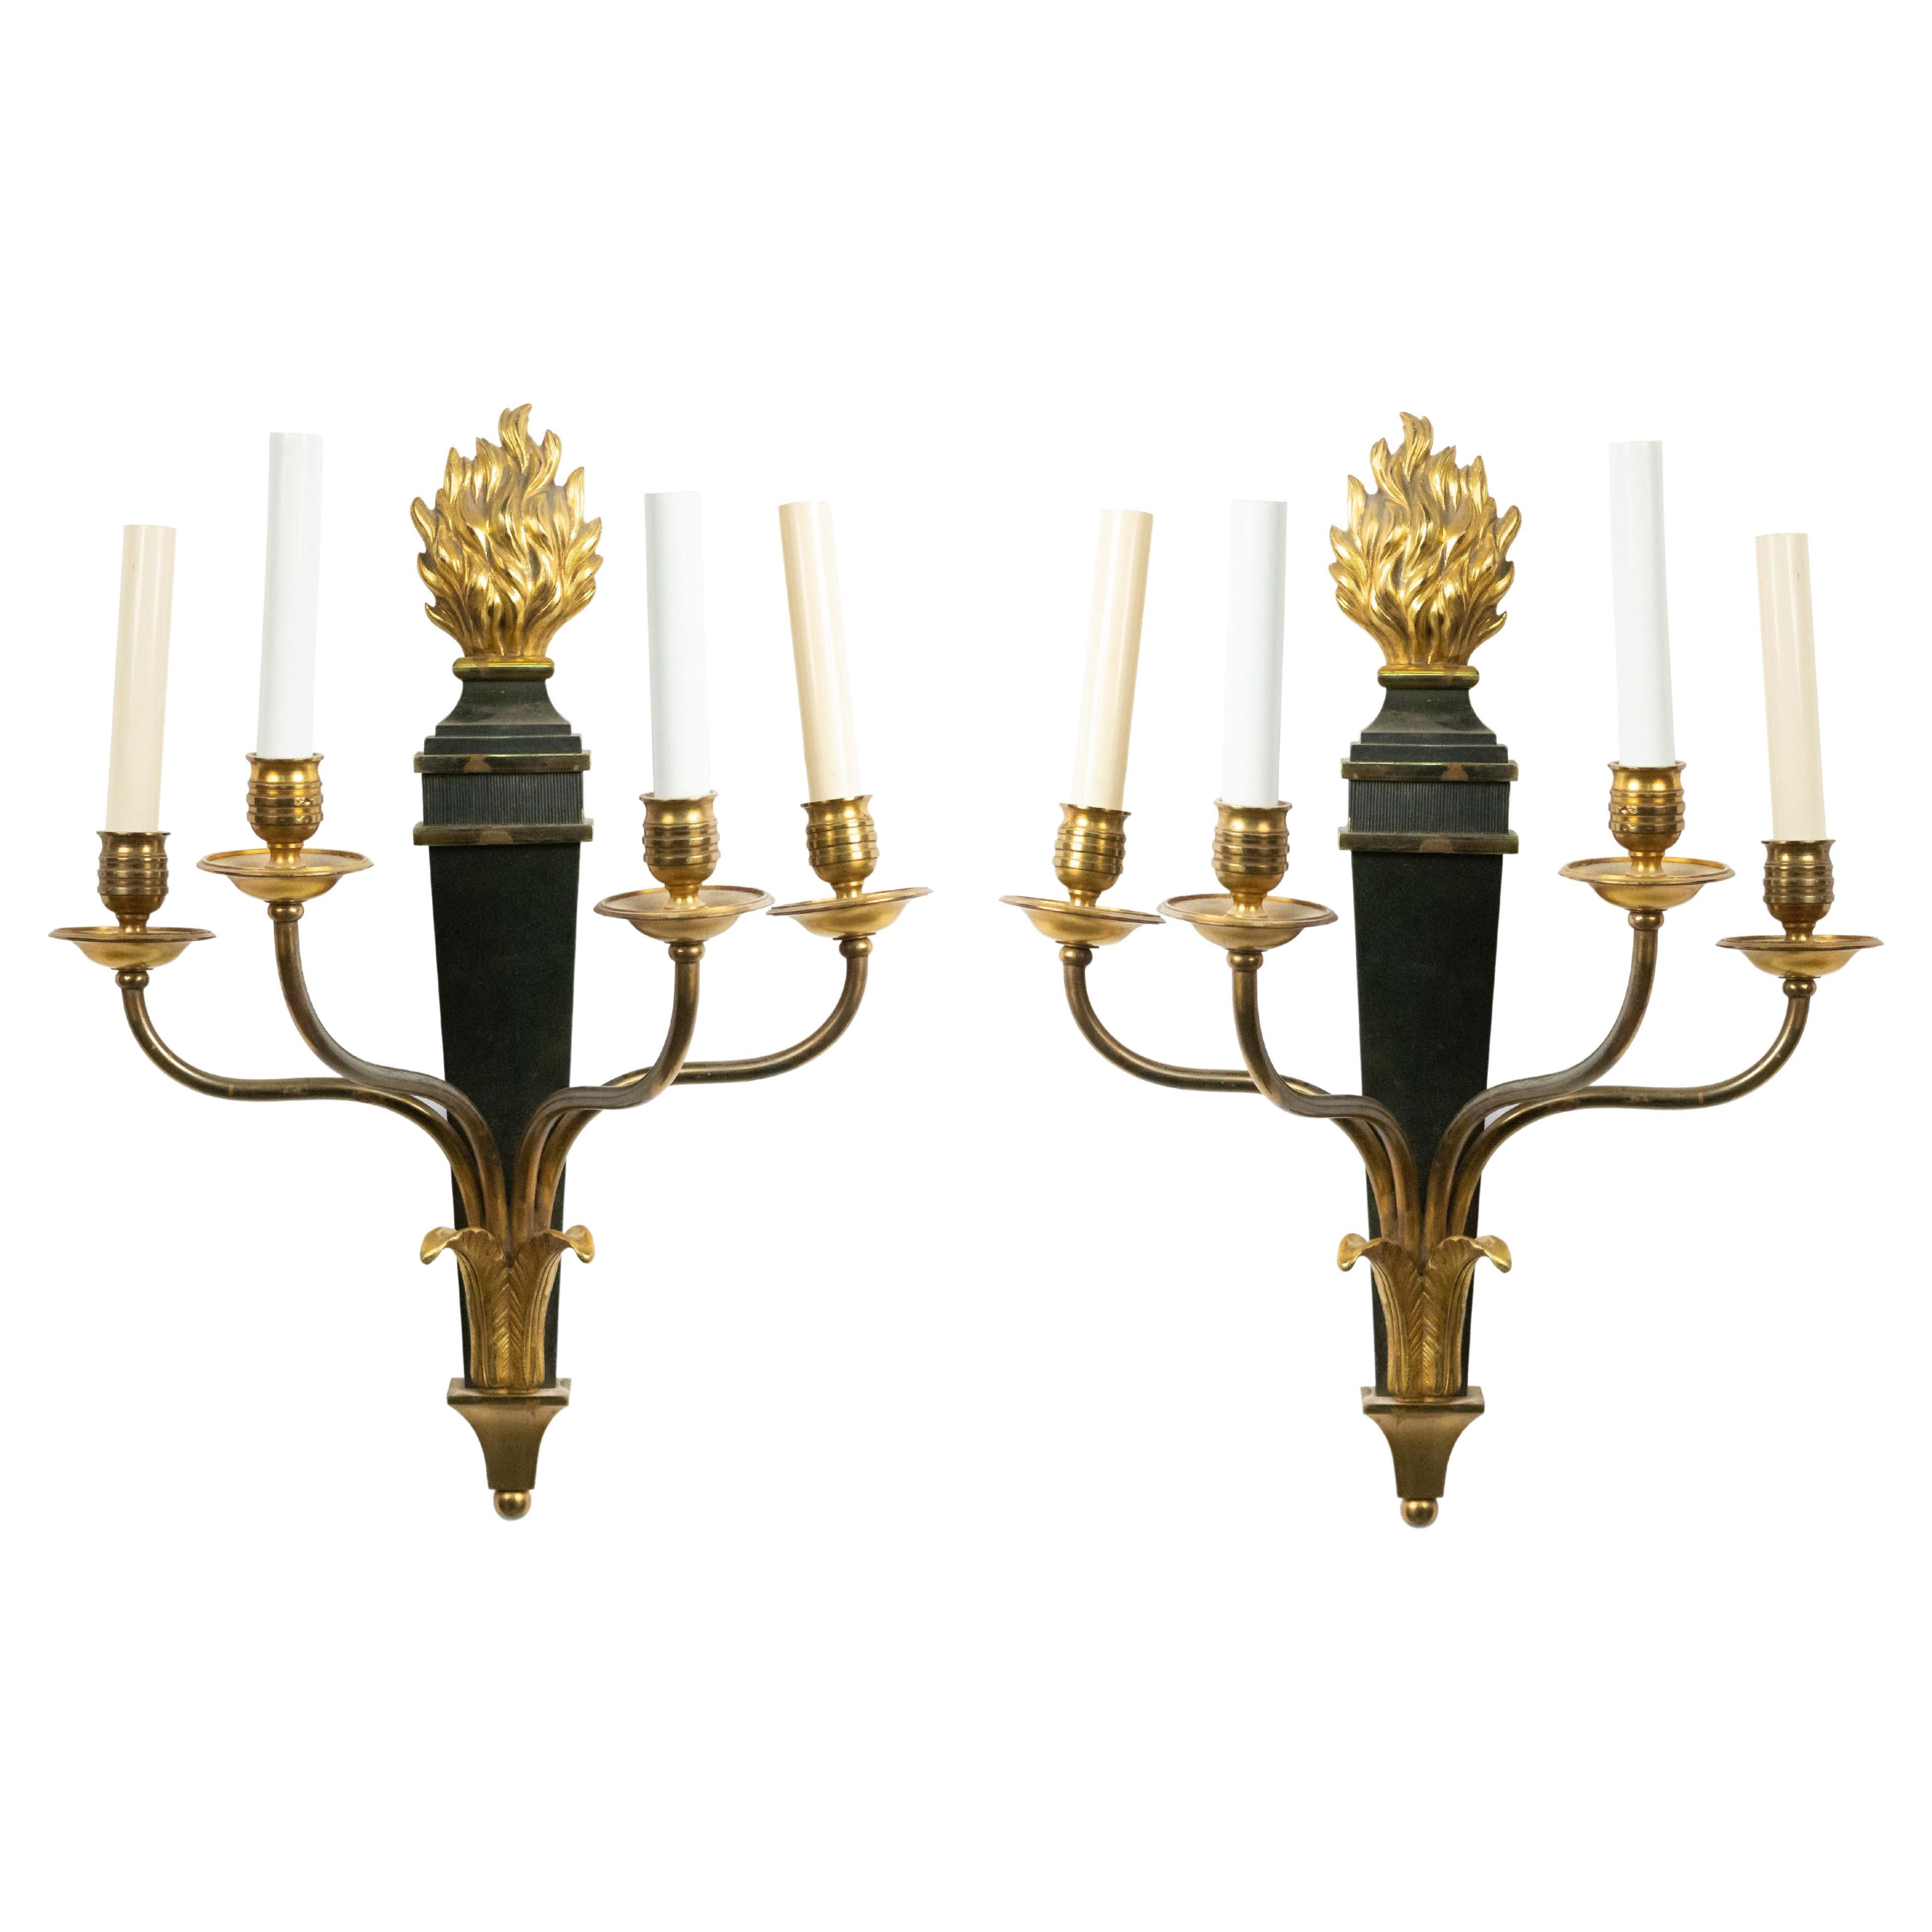 Pair of French Empire Style Ebonized and Gilt Four-Arm Wall Sconces